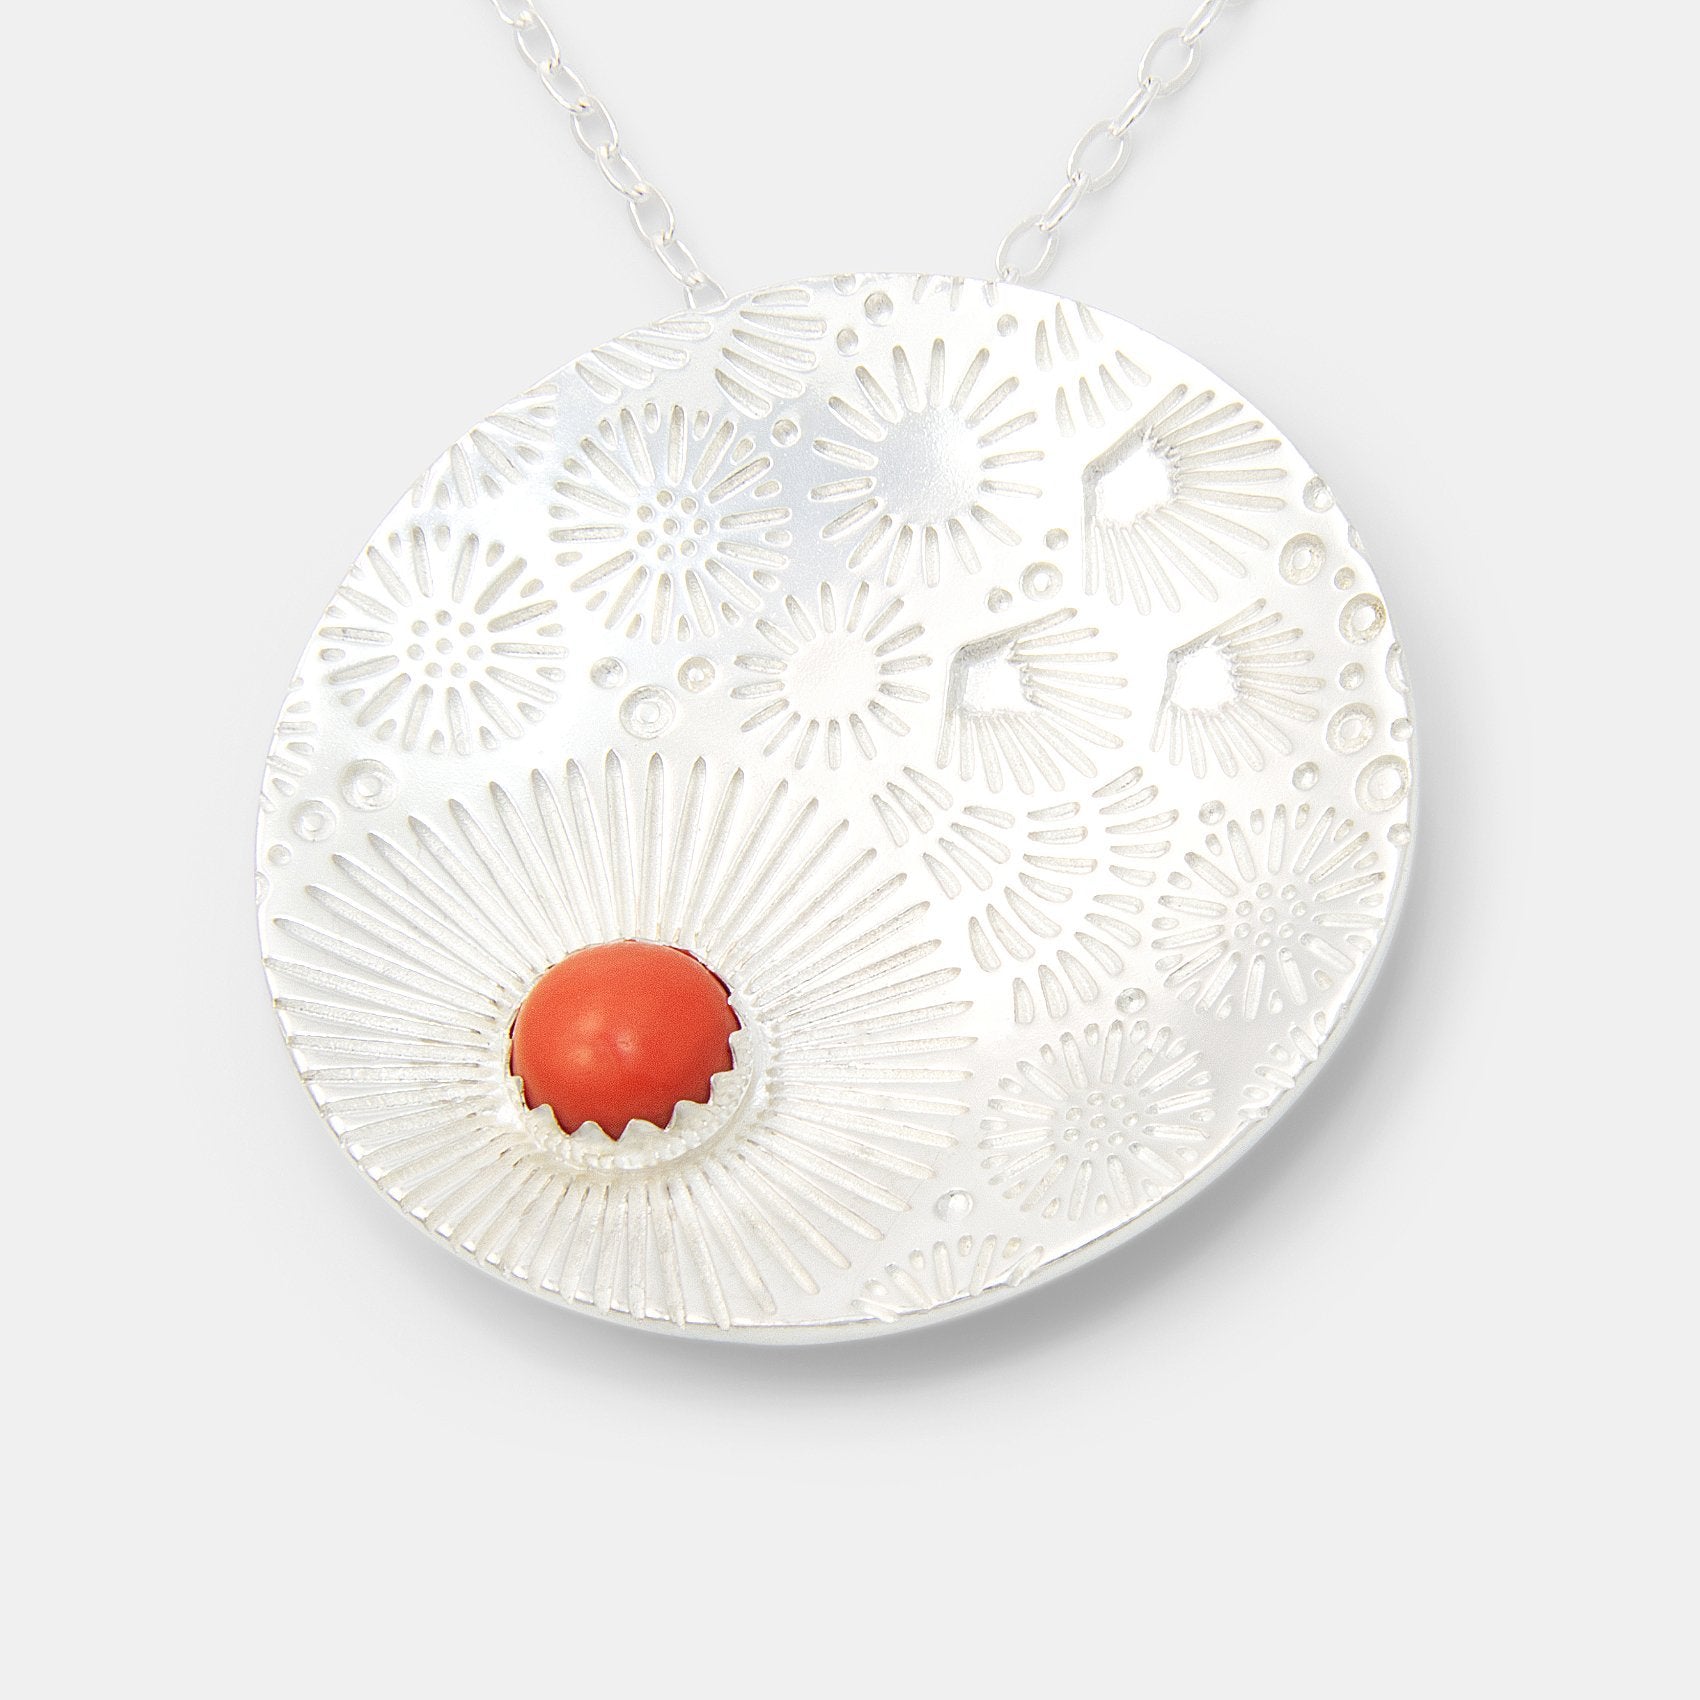 Coral reef & coral gem pendant necklace - Simone Walsh Jewellery Australia